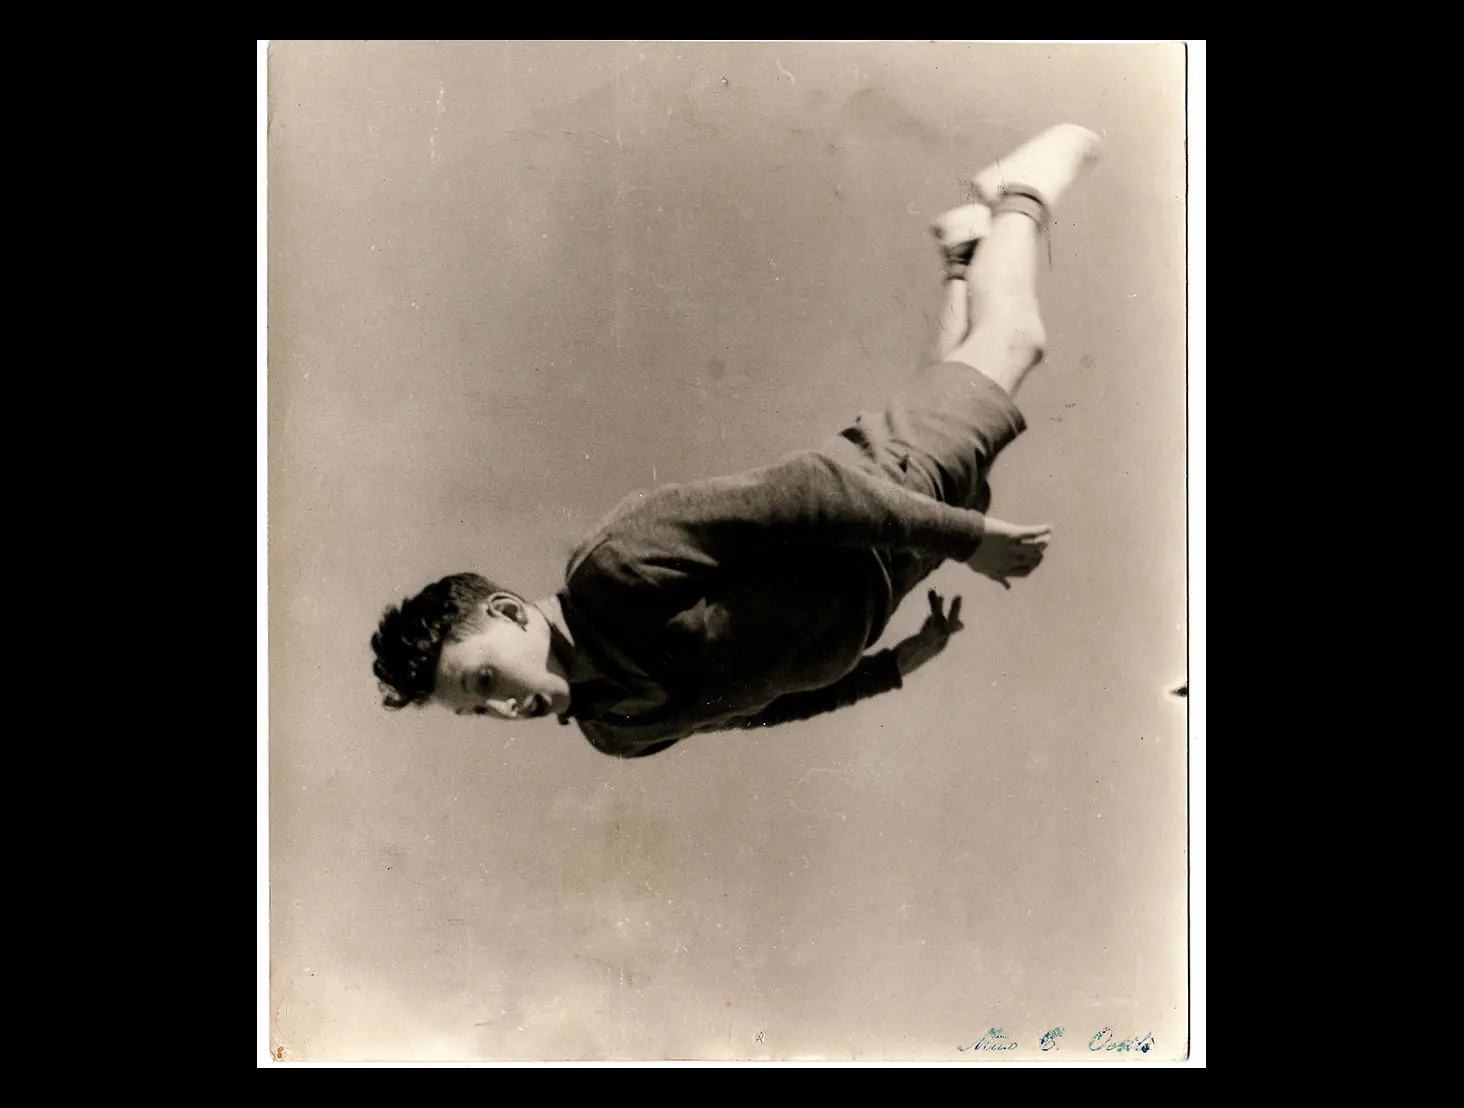 Black and white photo of a student in uniform diving headfirst in mid-air.